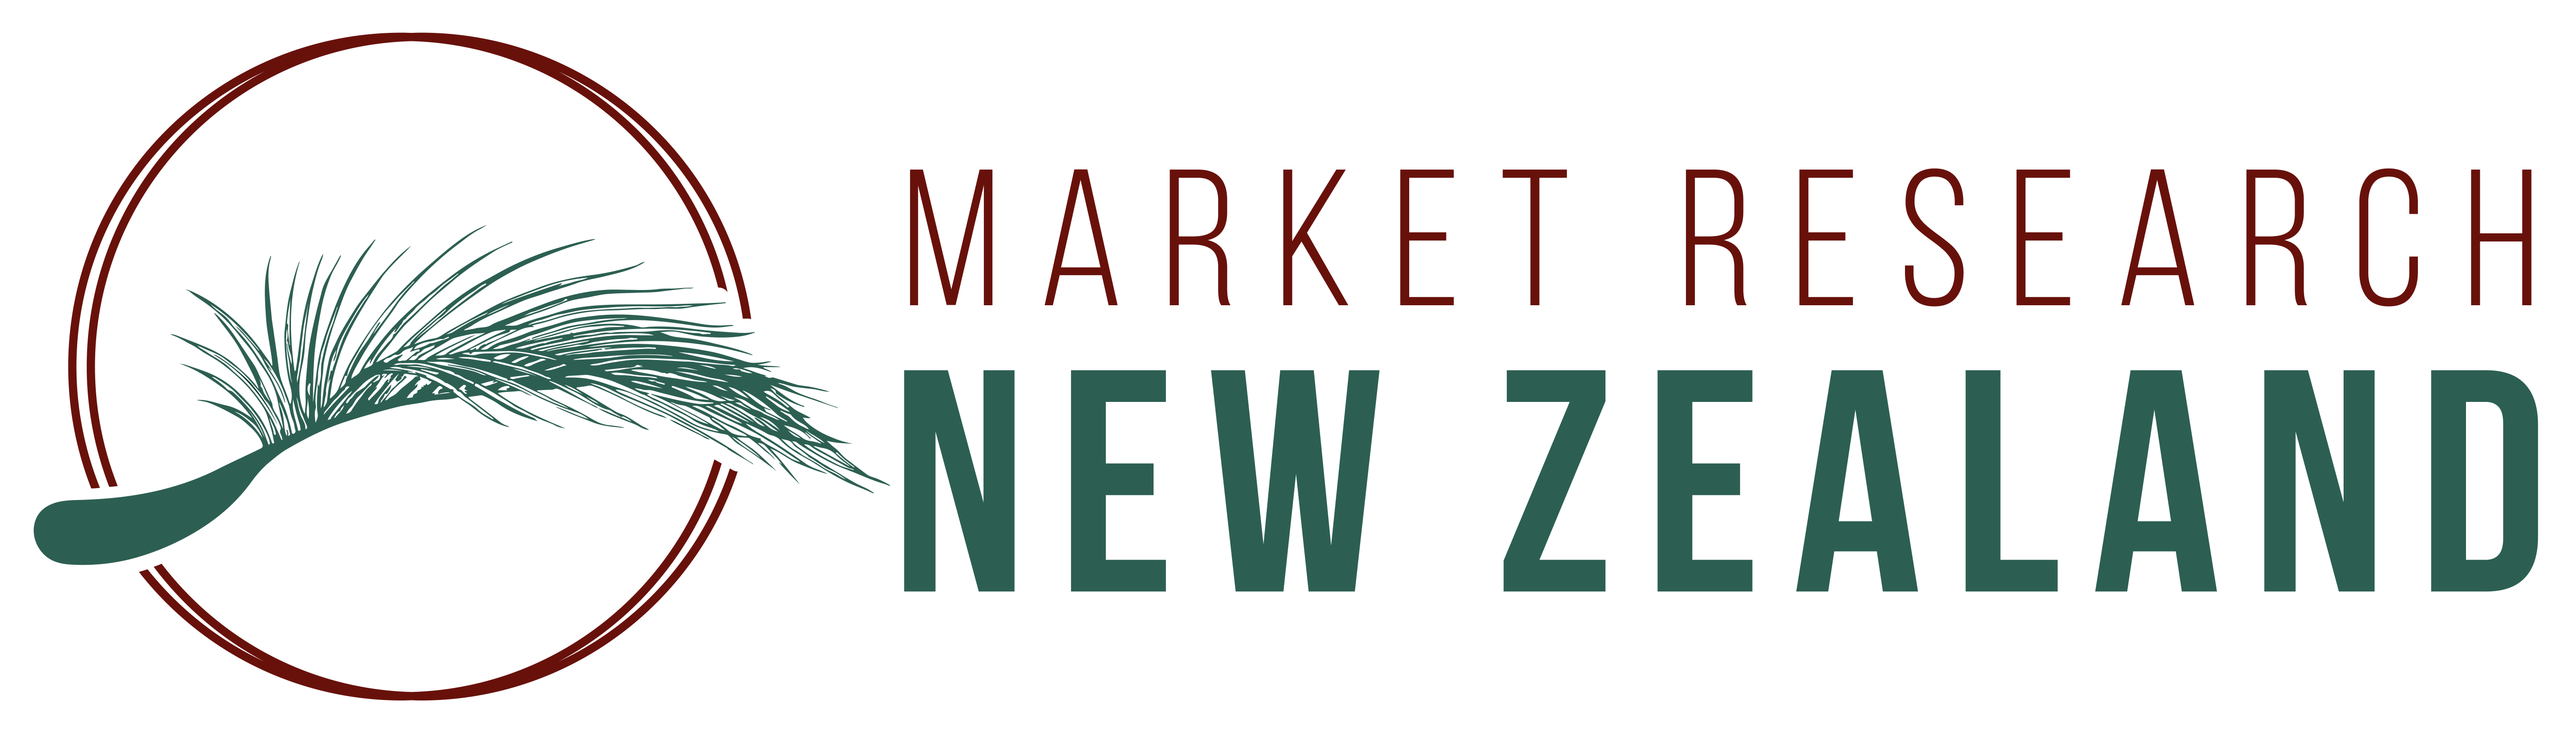 market research new zealand